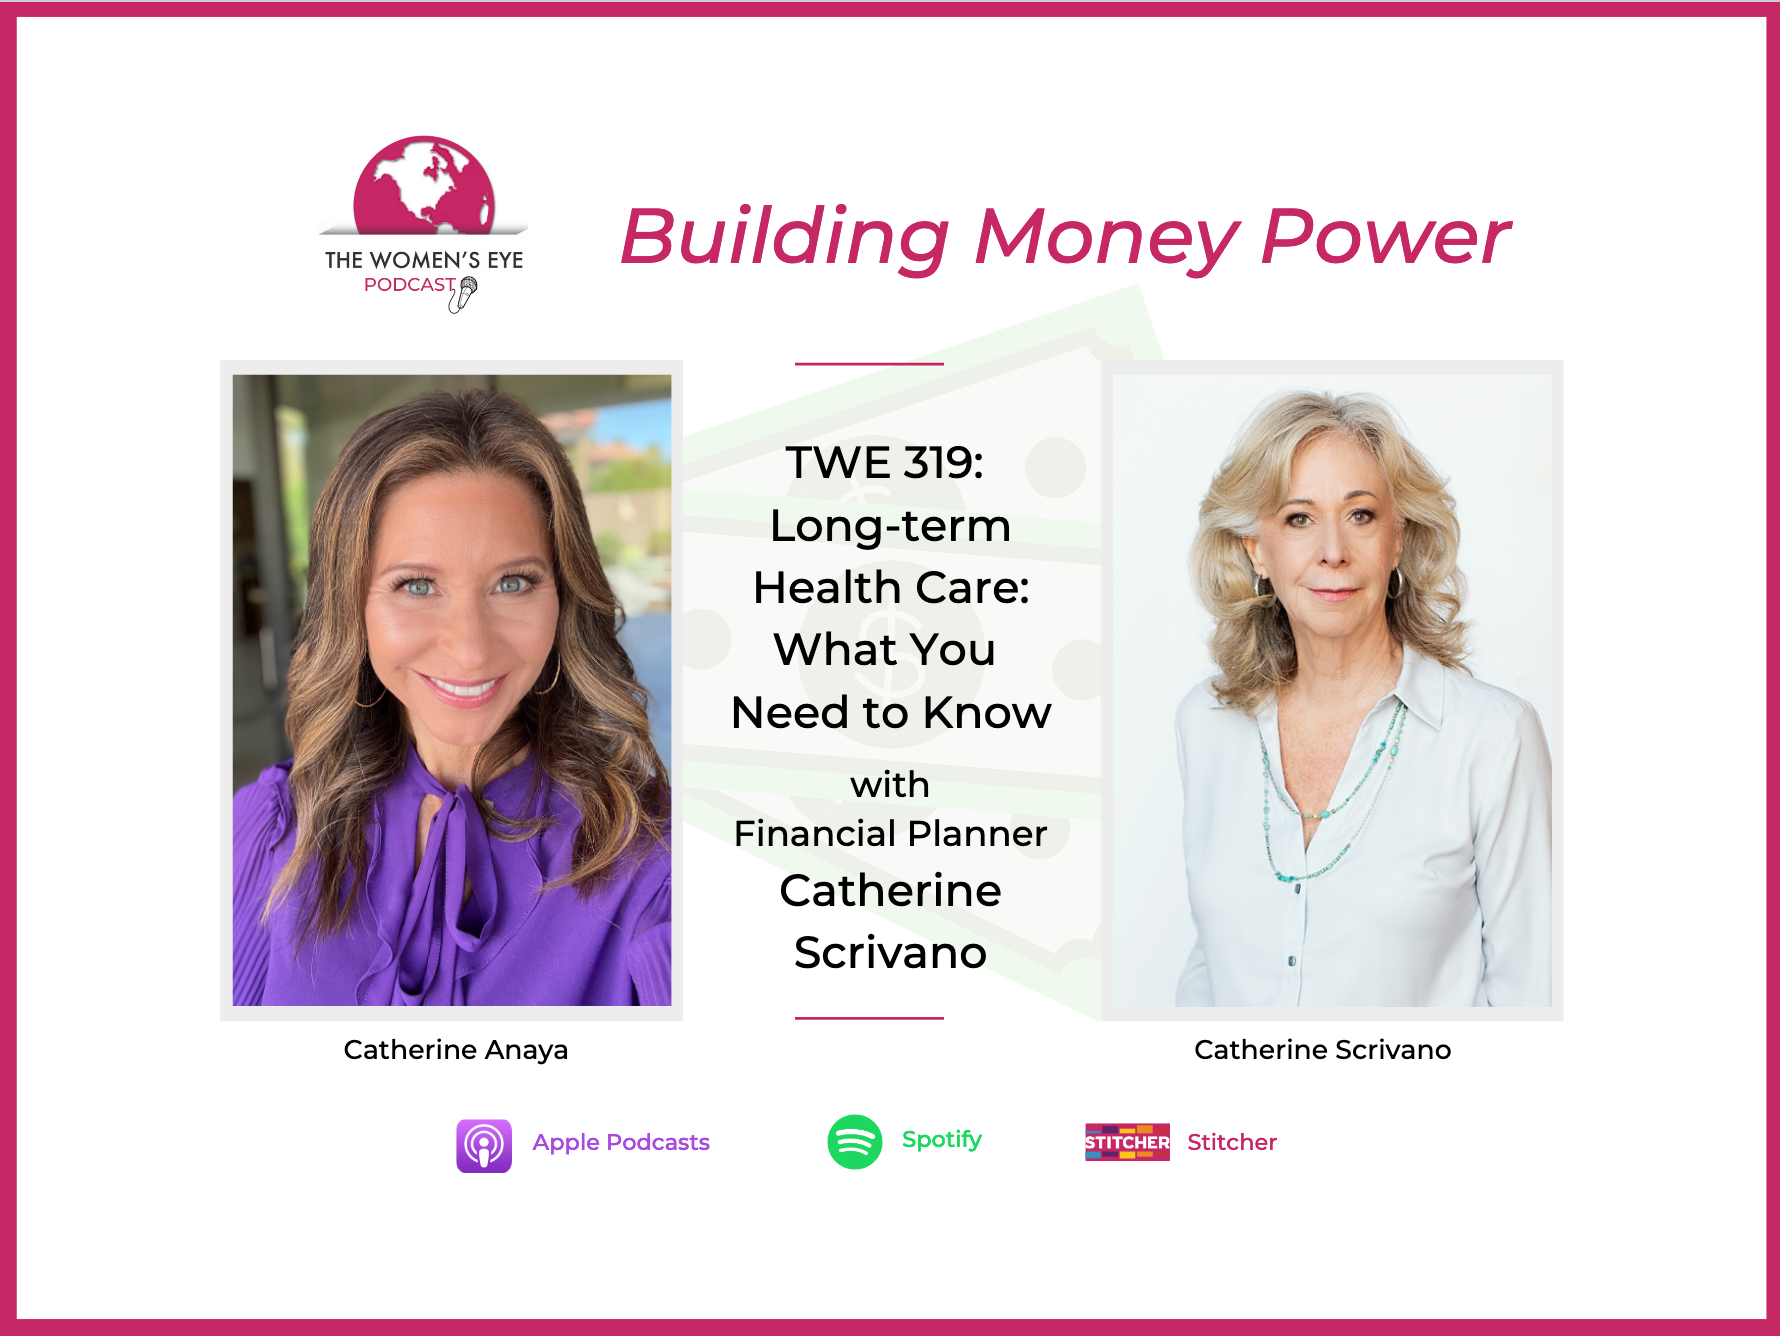 TWE 319: Financial planner Catherine Scrivano on What You Need to Know about Long Term Healthcare and Insurance on TWE's Building Money Power segment with Host: Catherine Anaya | The Women’s Eye Podcast | thewomenseye.com